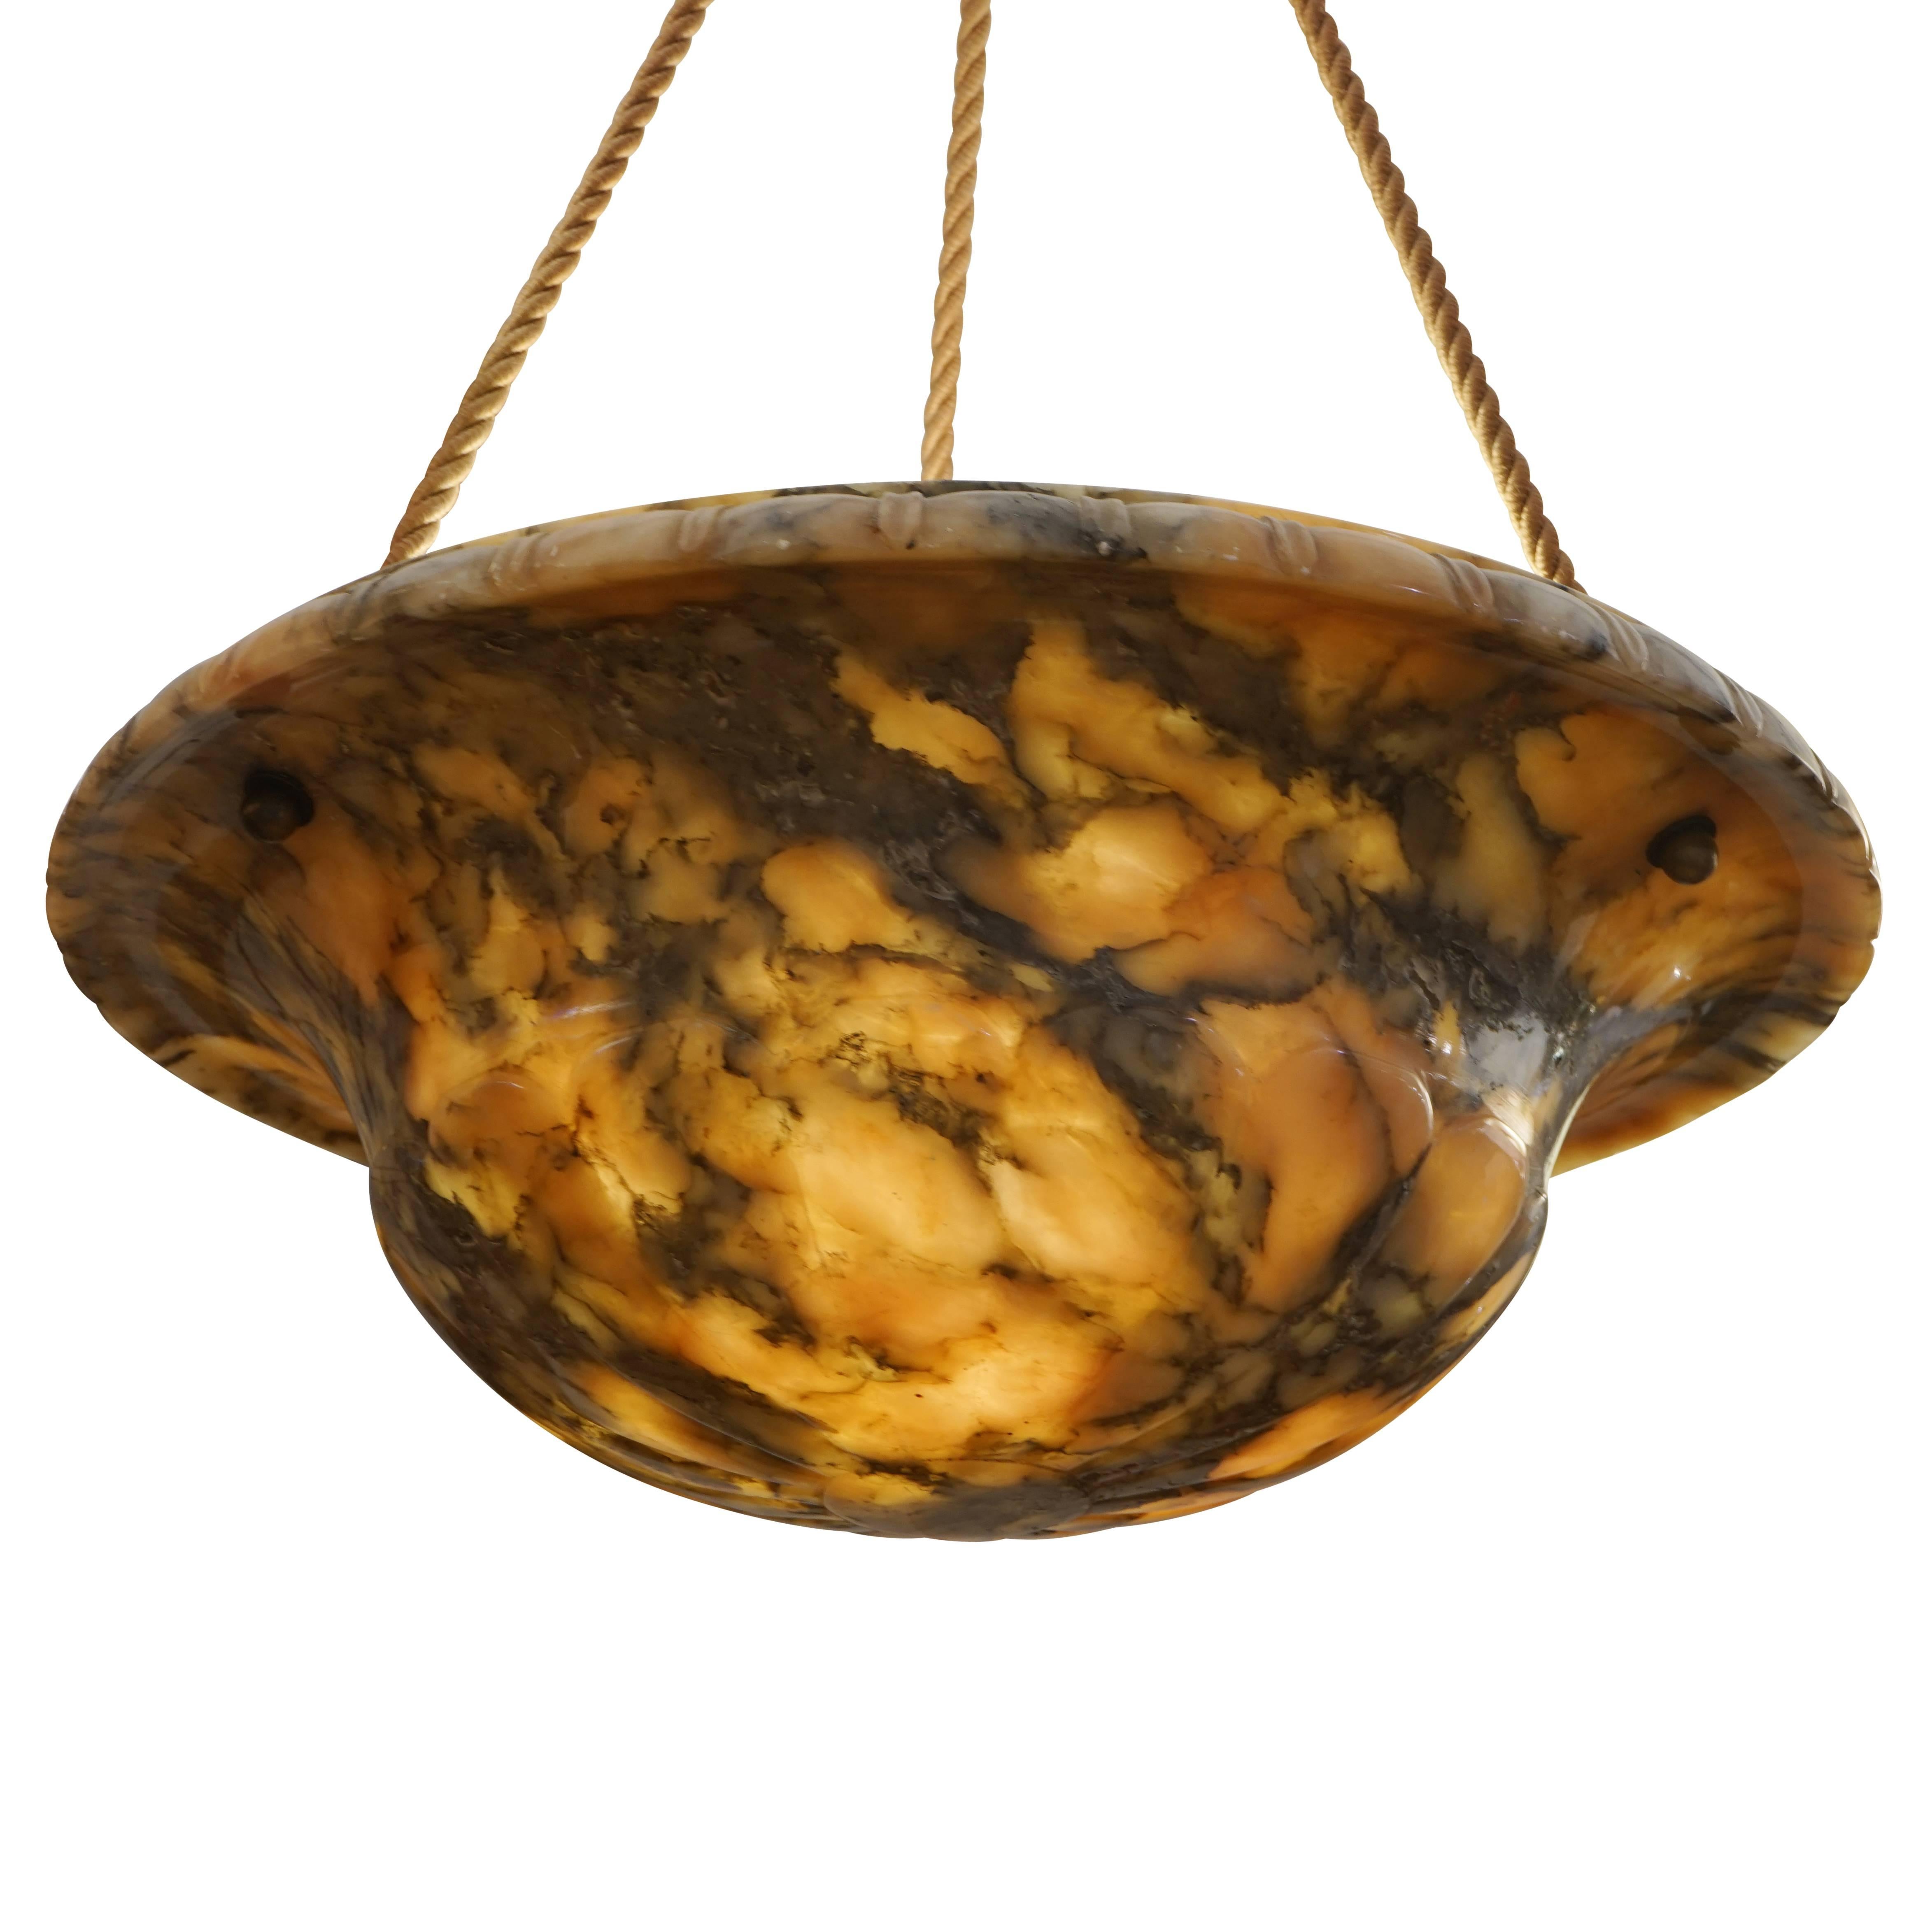 Highly figured alabaster stone with matching canopy and braided electrified cords. Features three lightbulbs.

Dimensions: 16